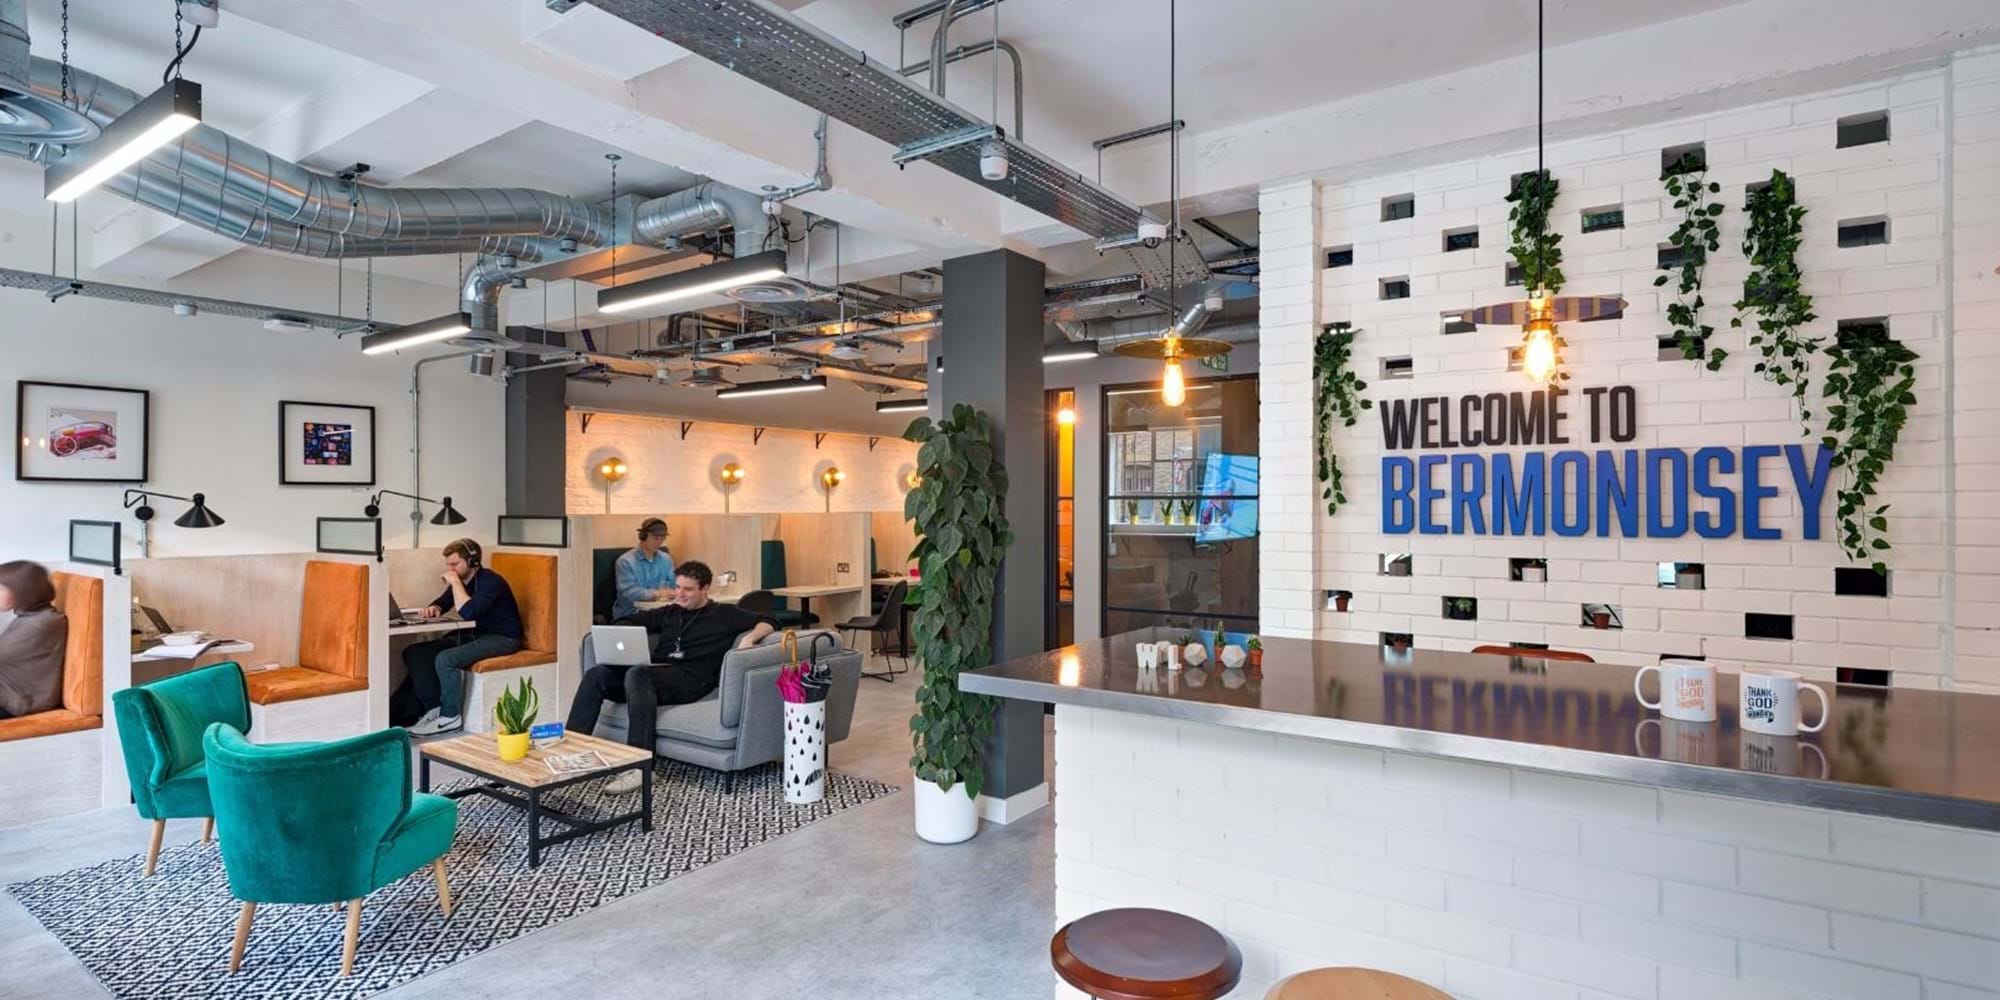 Modus Workspace office design, fit out and refurbishment - Worklife - Bermondsey - Worklife Bermondsey 01 highres sRGB.jpg